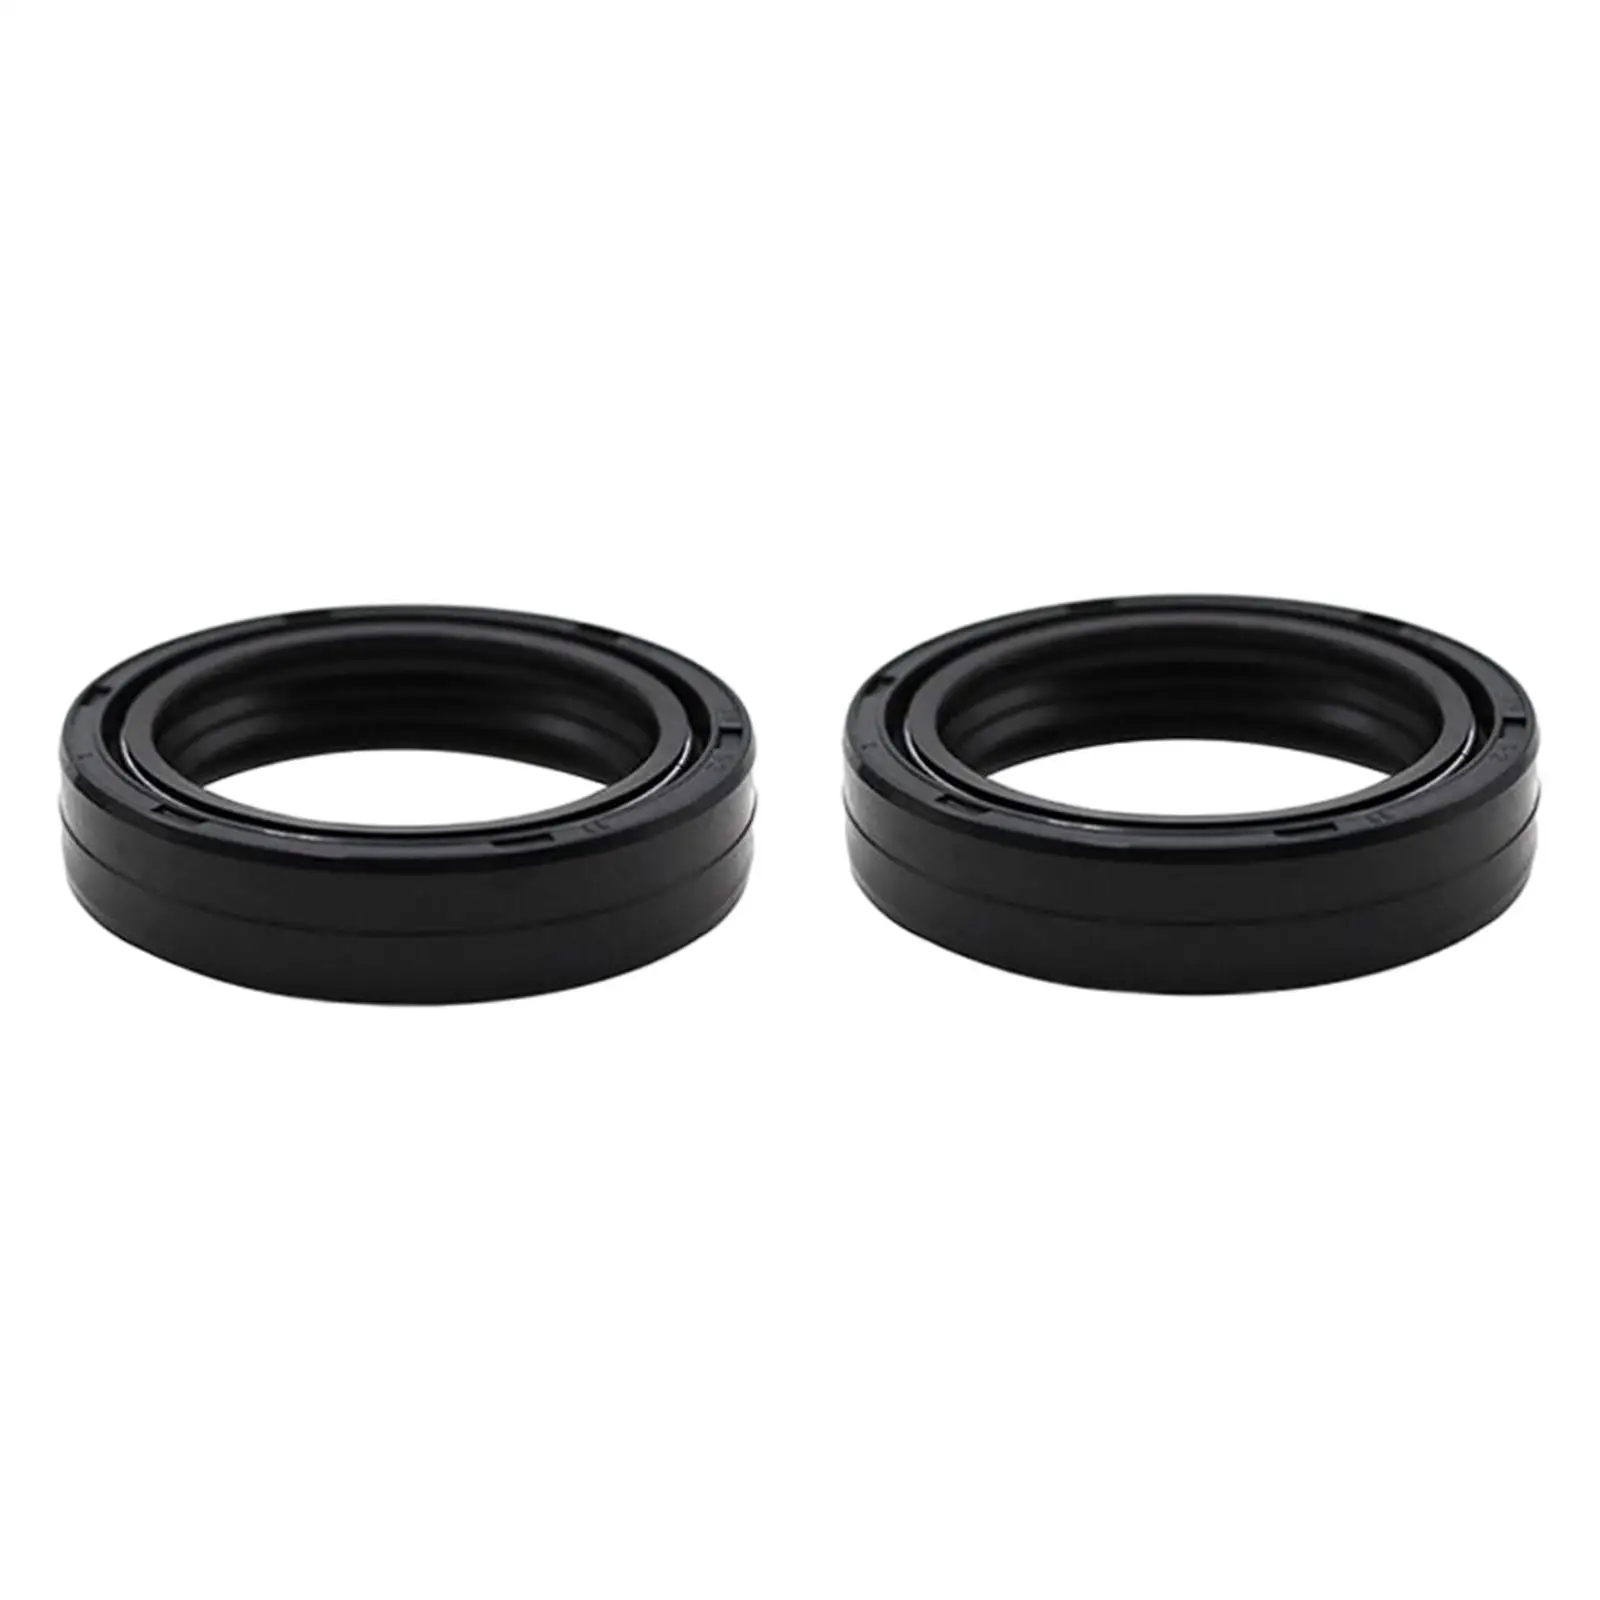 

2 Pieces Damper Oil Dust Seal Wear Resistant Fork Shock Absorber Oil Seal for Honda CB750 Spare Parts Accessory Repair